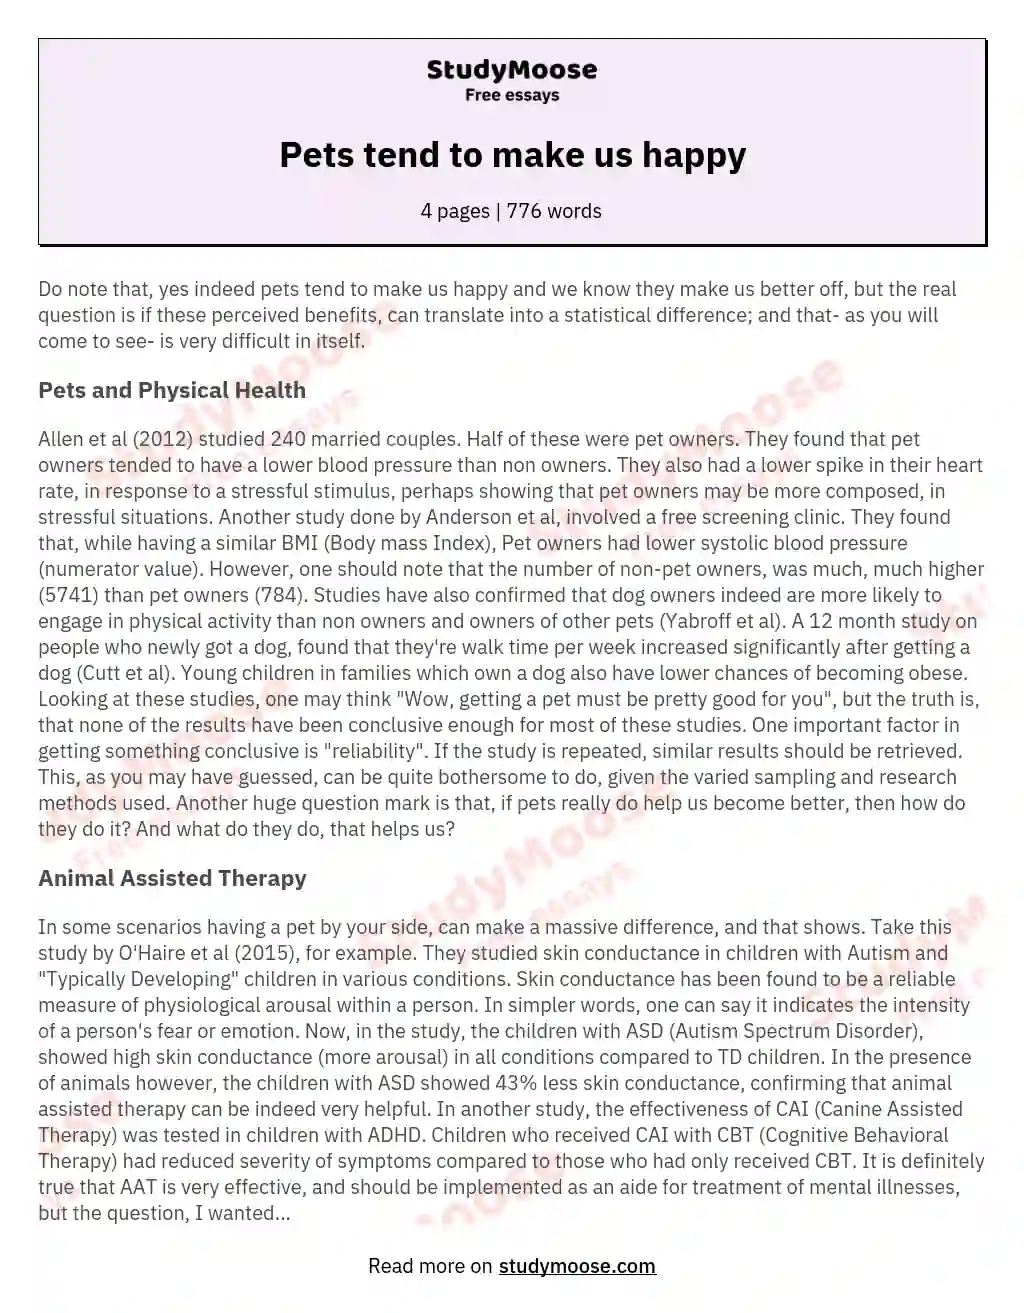 Pets tend to make us happy essay